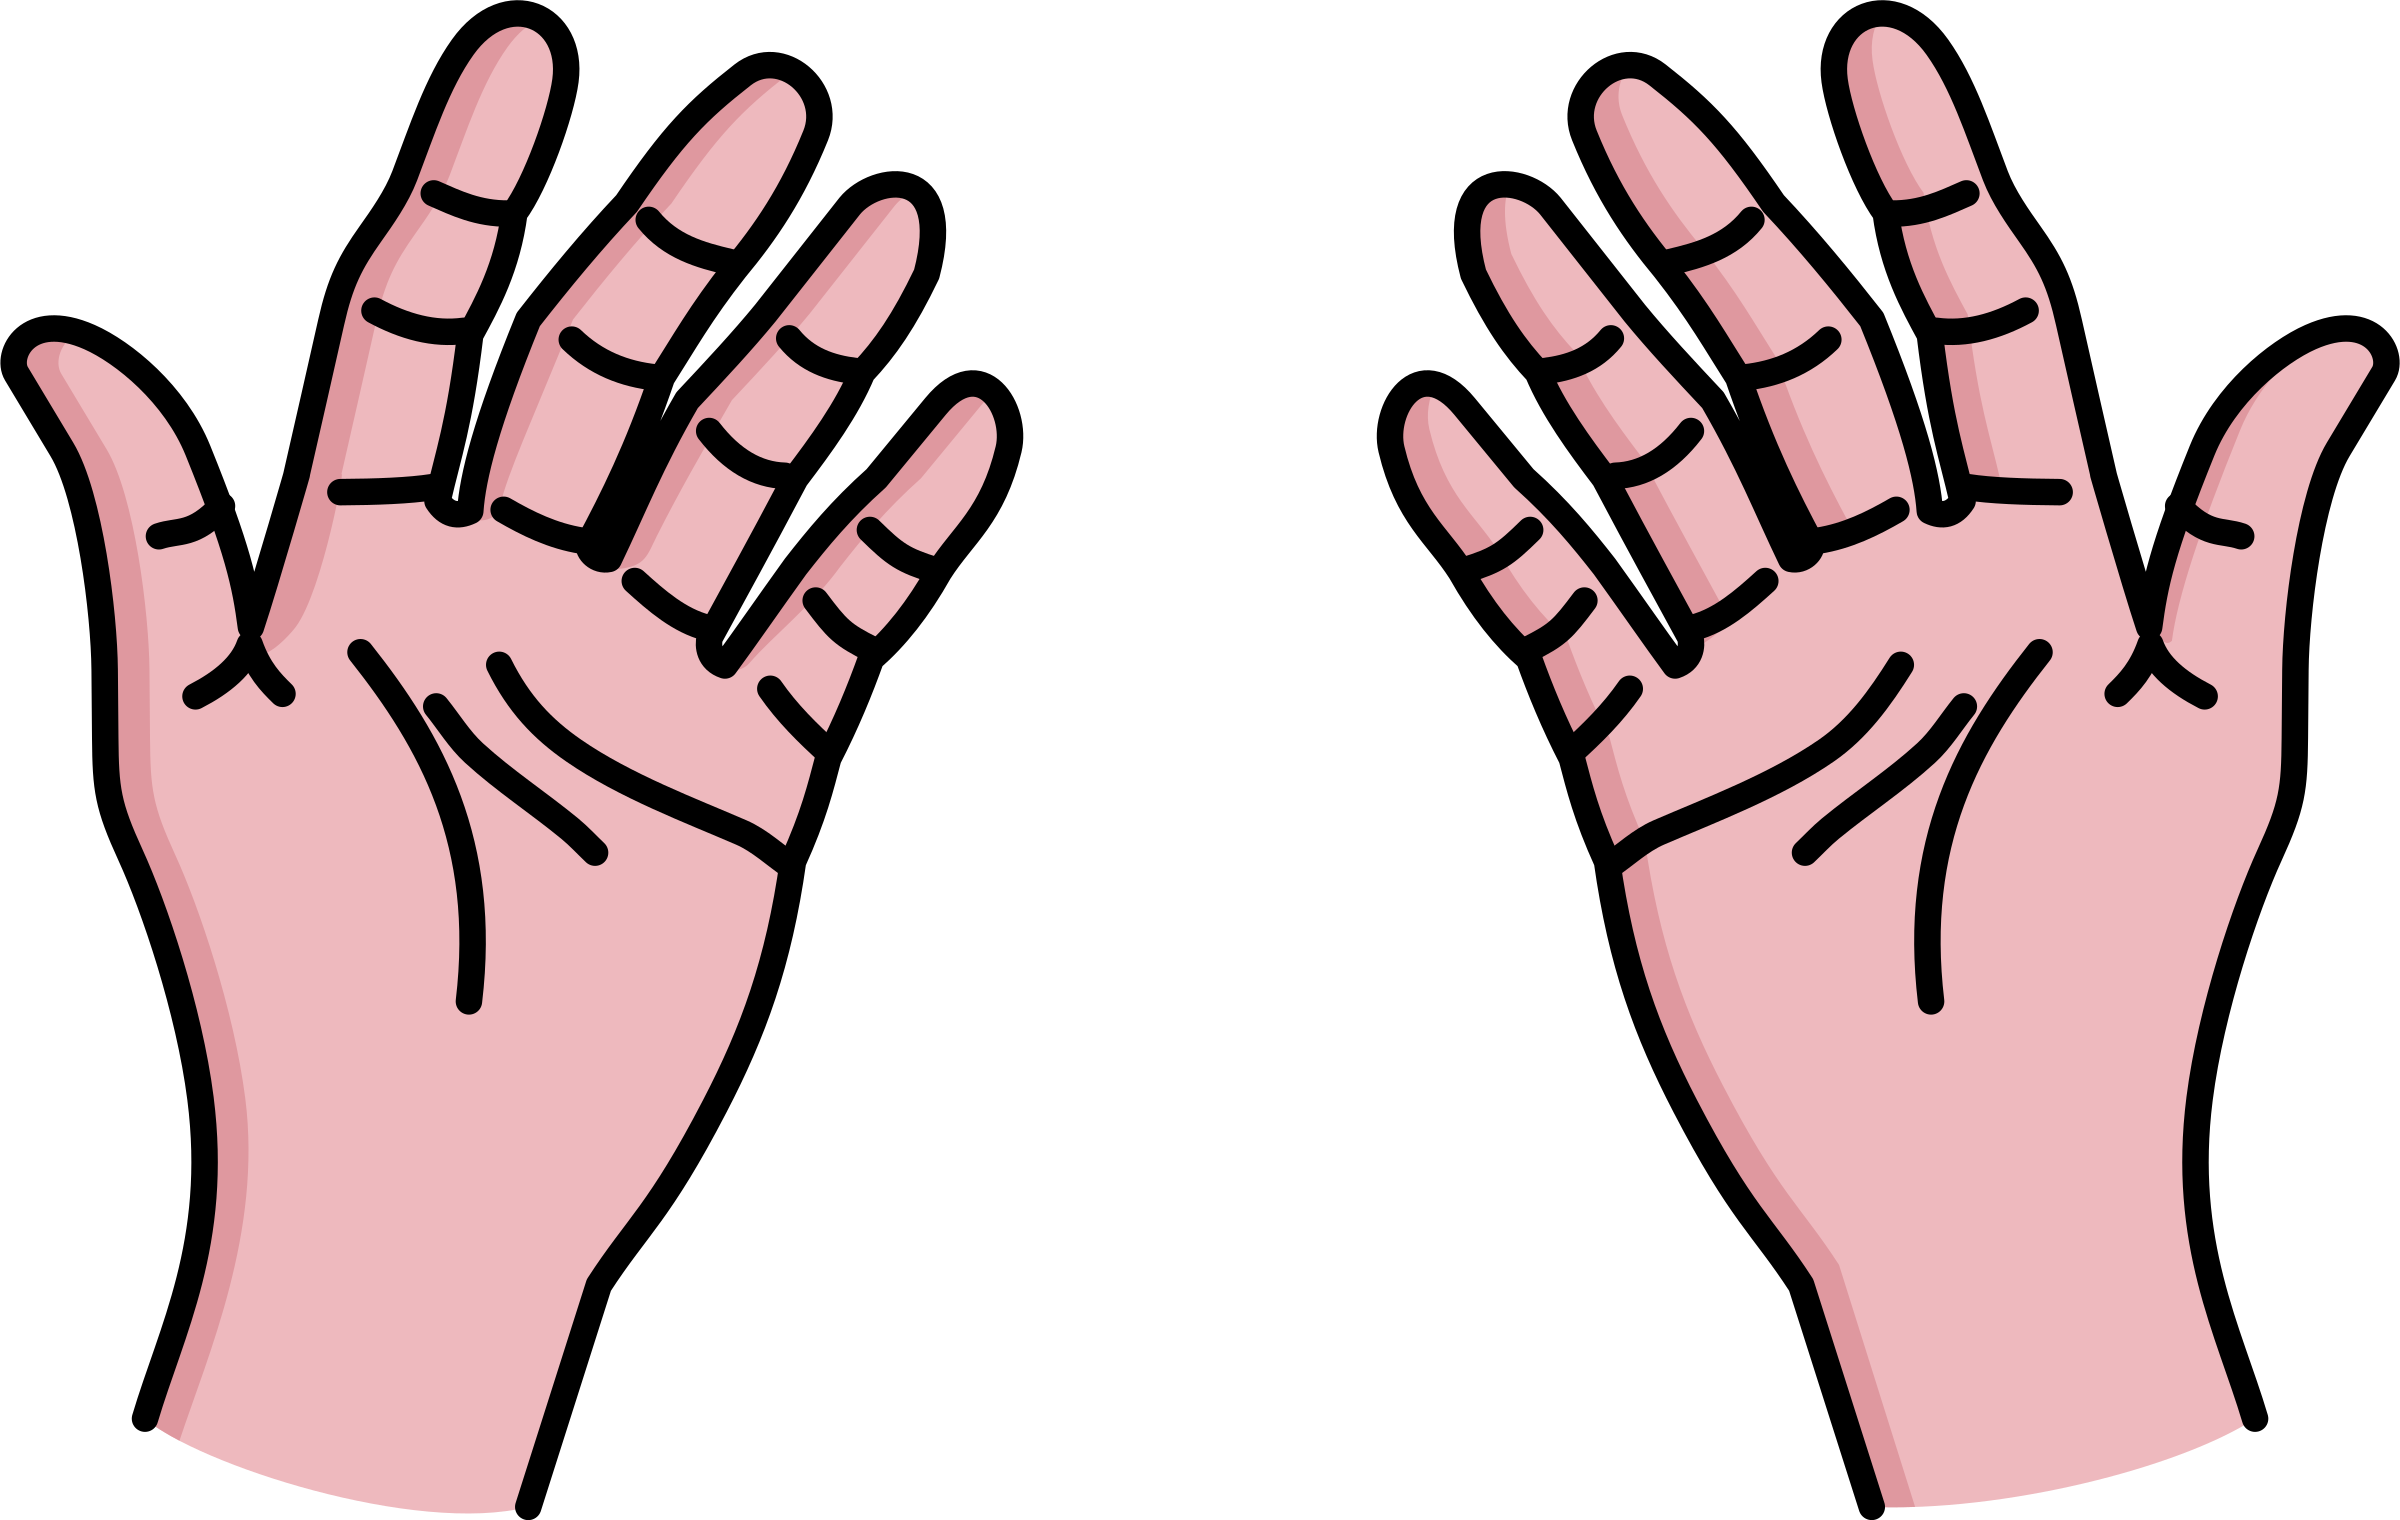 The hands on the clipart - Clipground